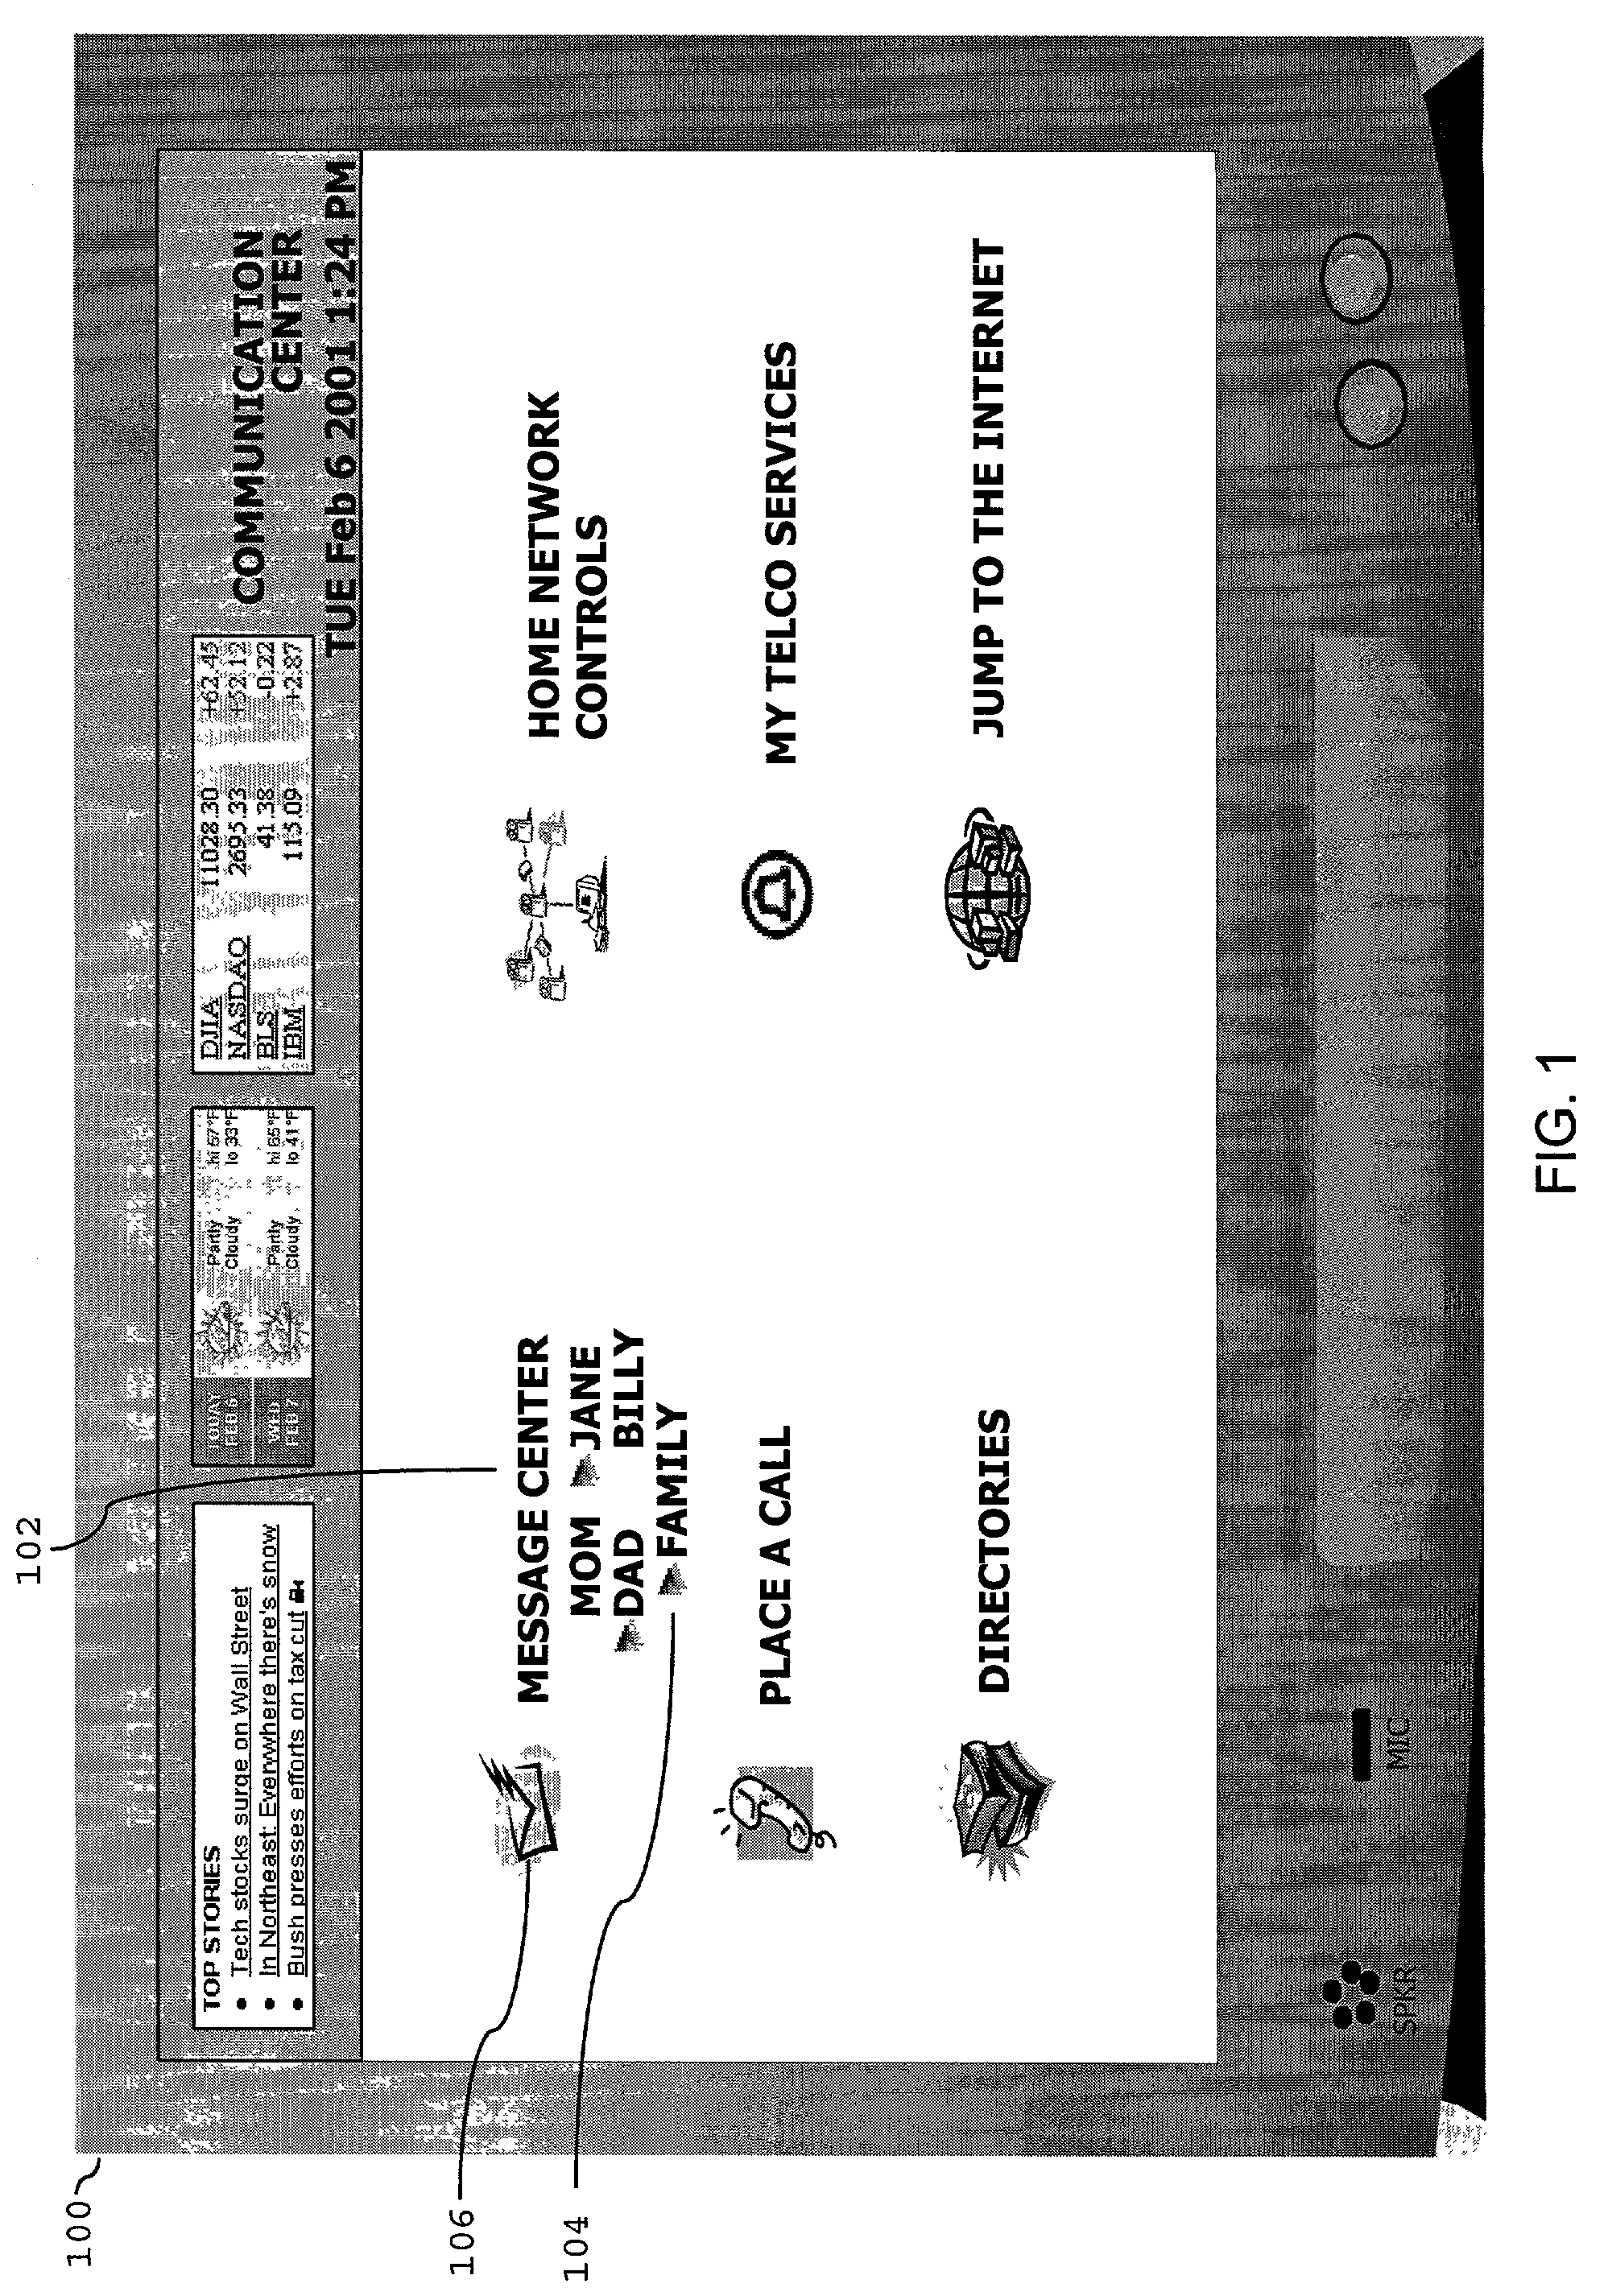 Systems and methods for remote access to a display-based bulletin board in a shared user environment